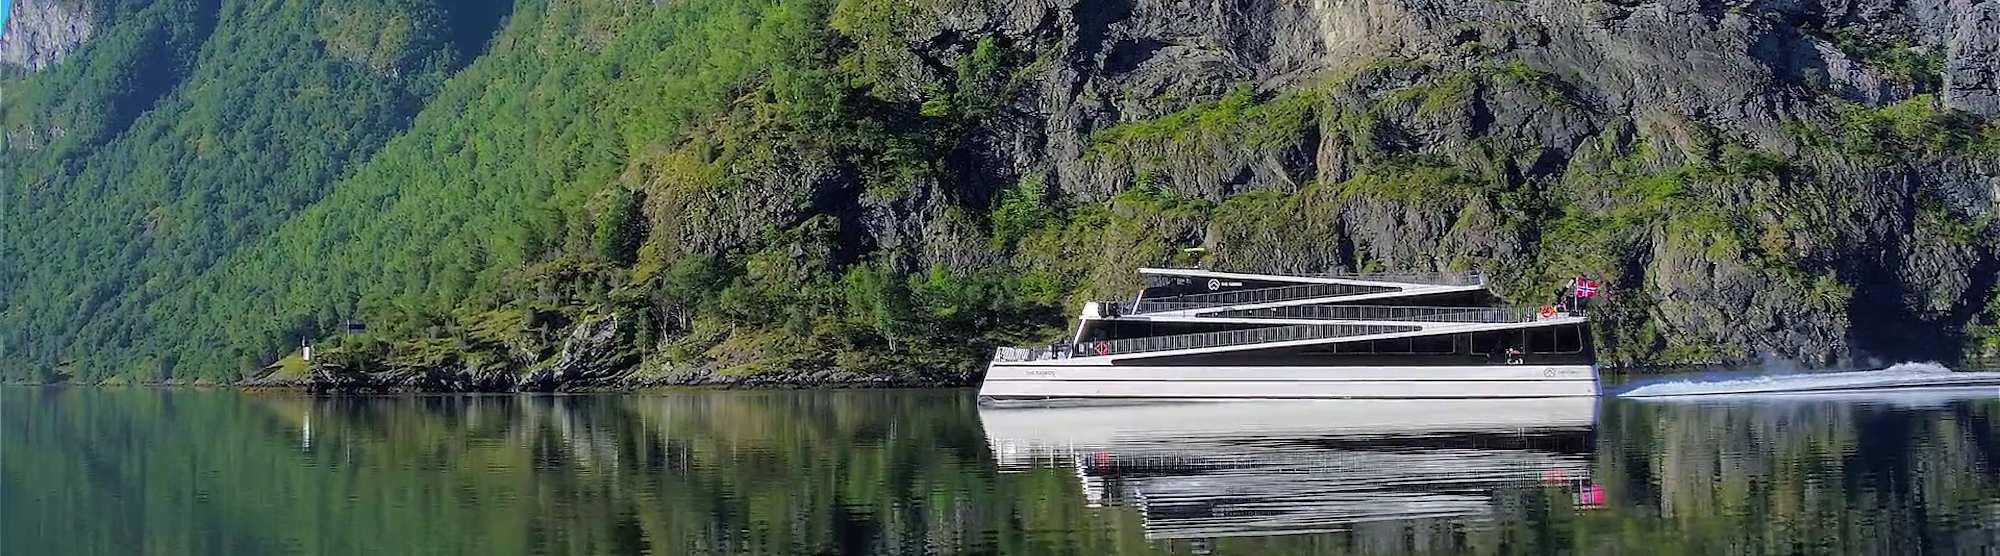 Vision of the fjords - a hybrid electric sightseeing vessel